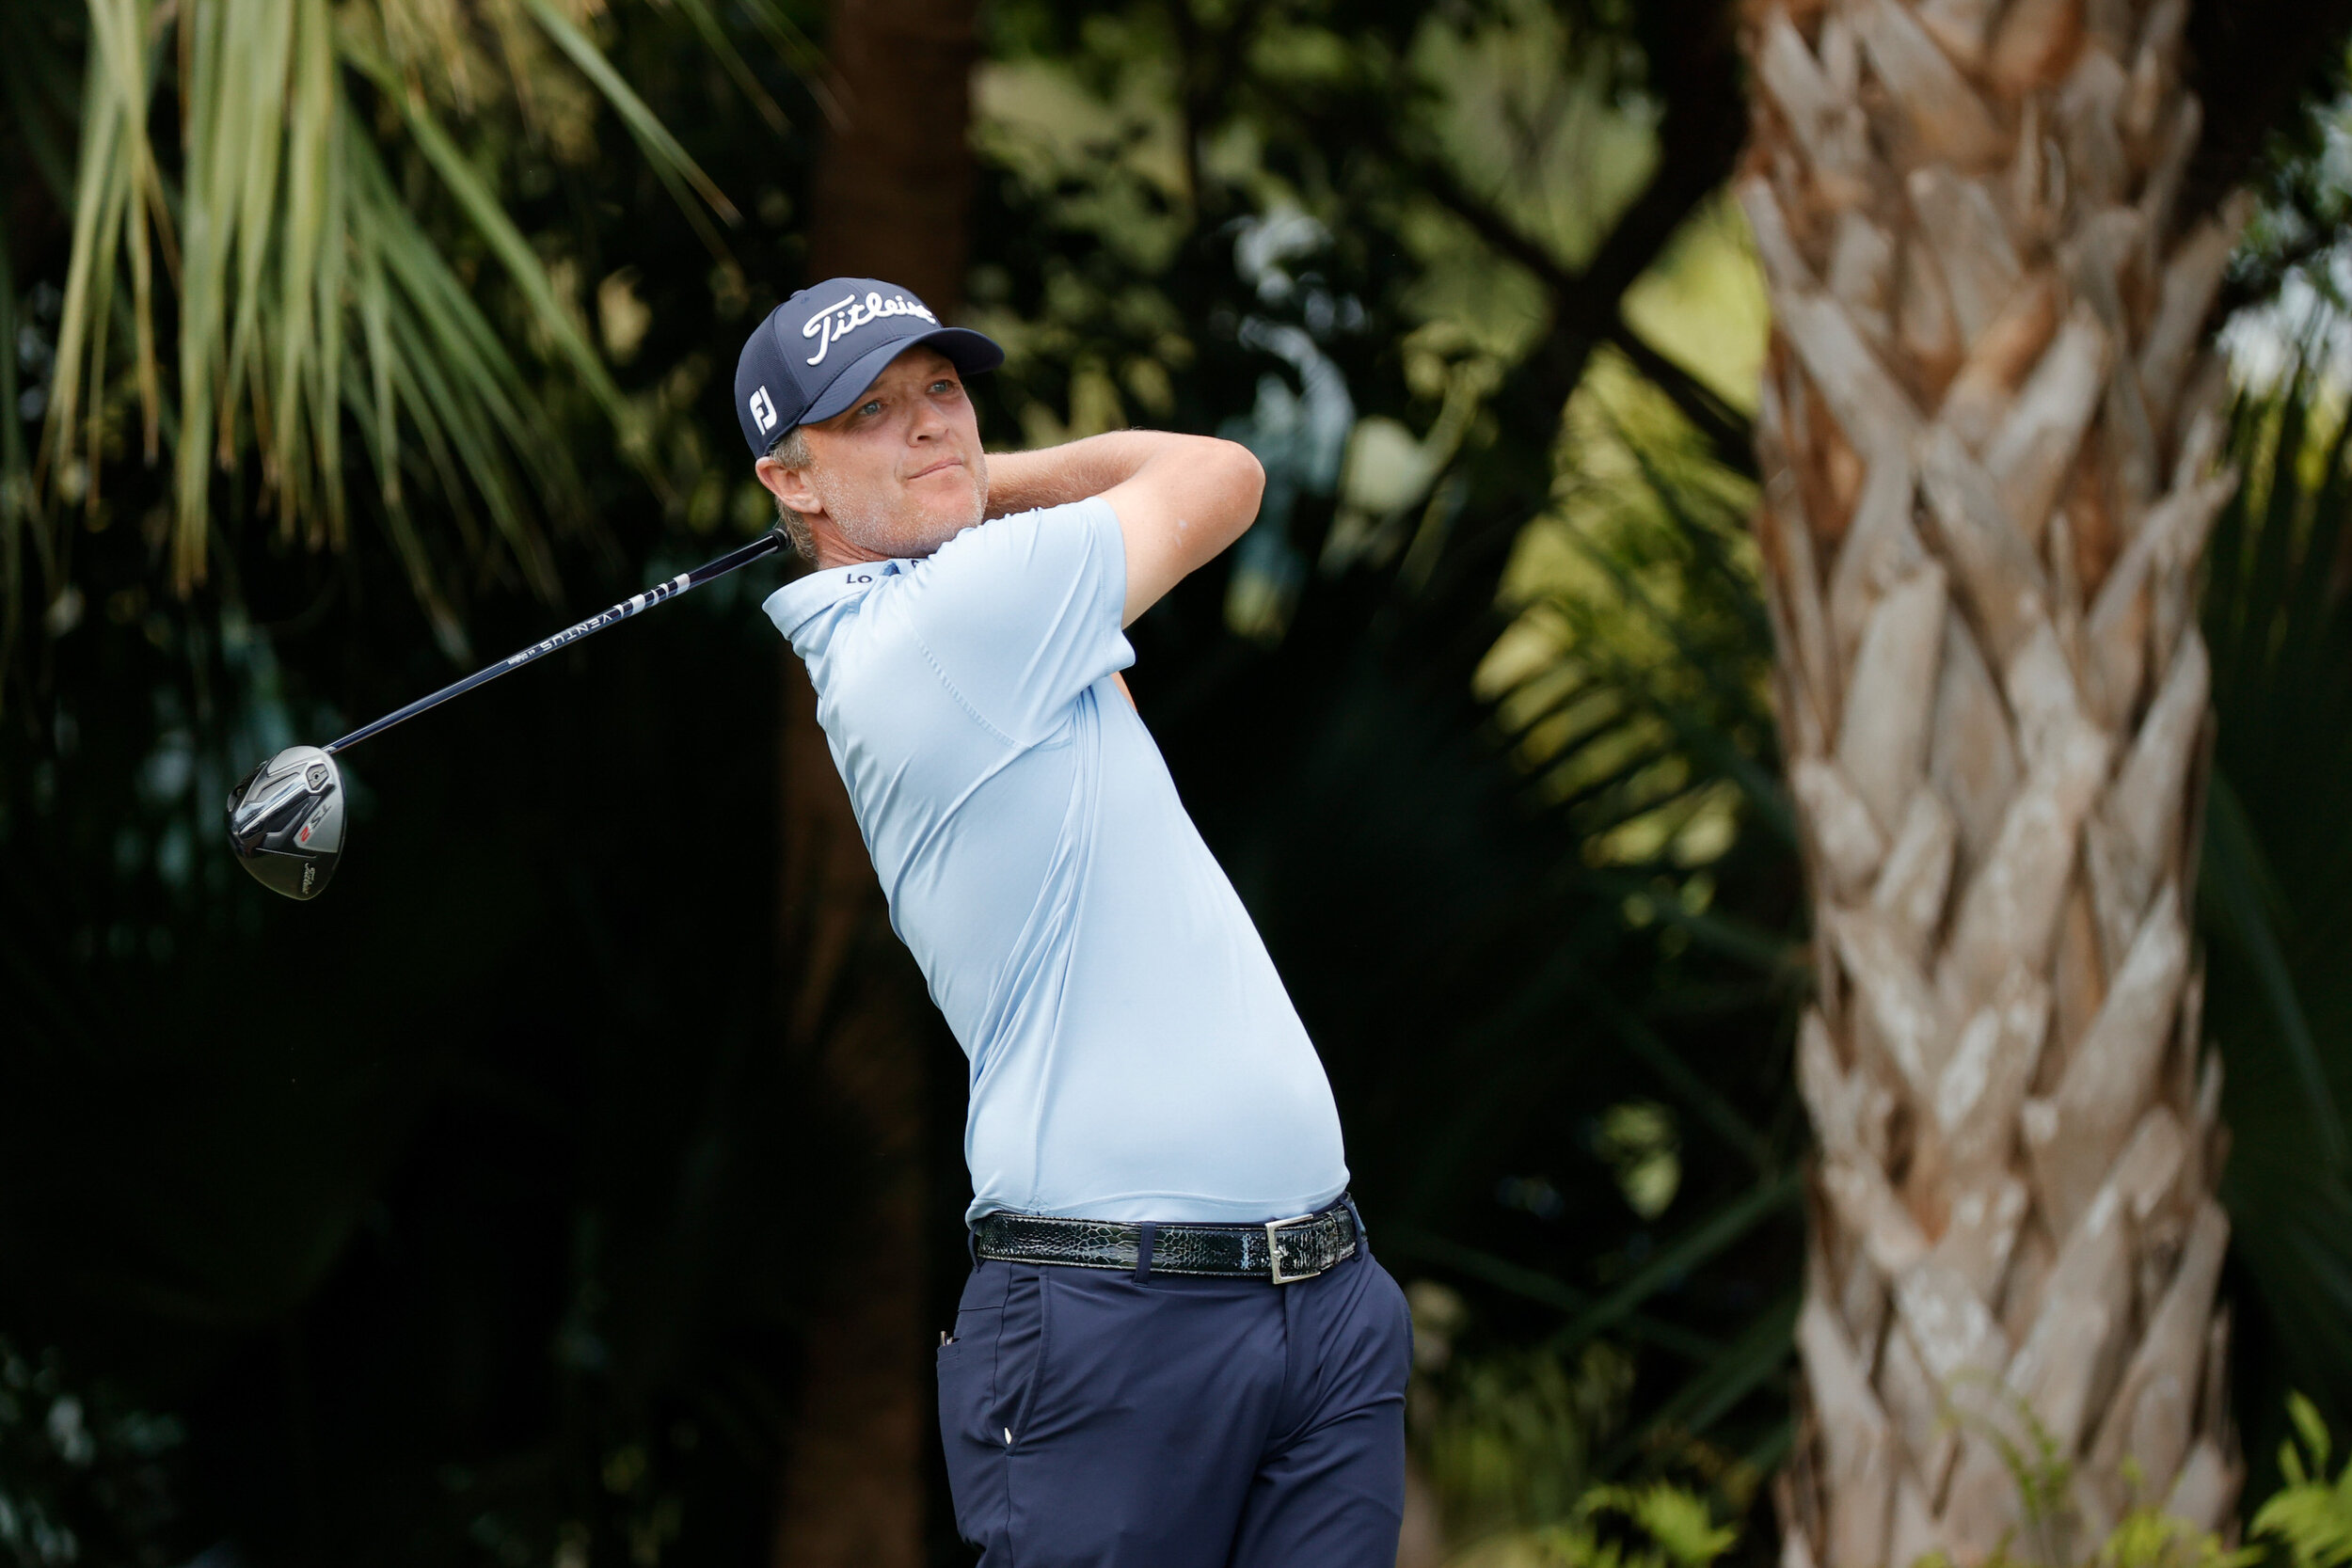  PALM BEACH GARDENS, FLORIDA - MARCH 19: Matt Jones of Australia plays his shot from the third tee during the second round of The Honda Classic at PGA National Champion course on March 19, 2021 in Palm Beach Gardens, Florida. (Photo by Jared C. Tilto